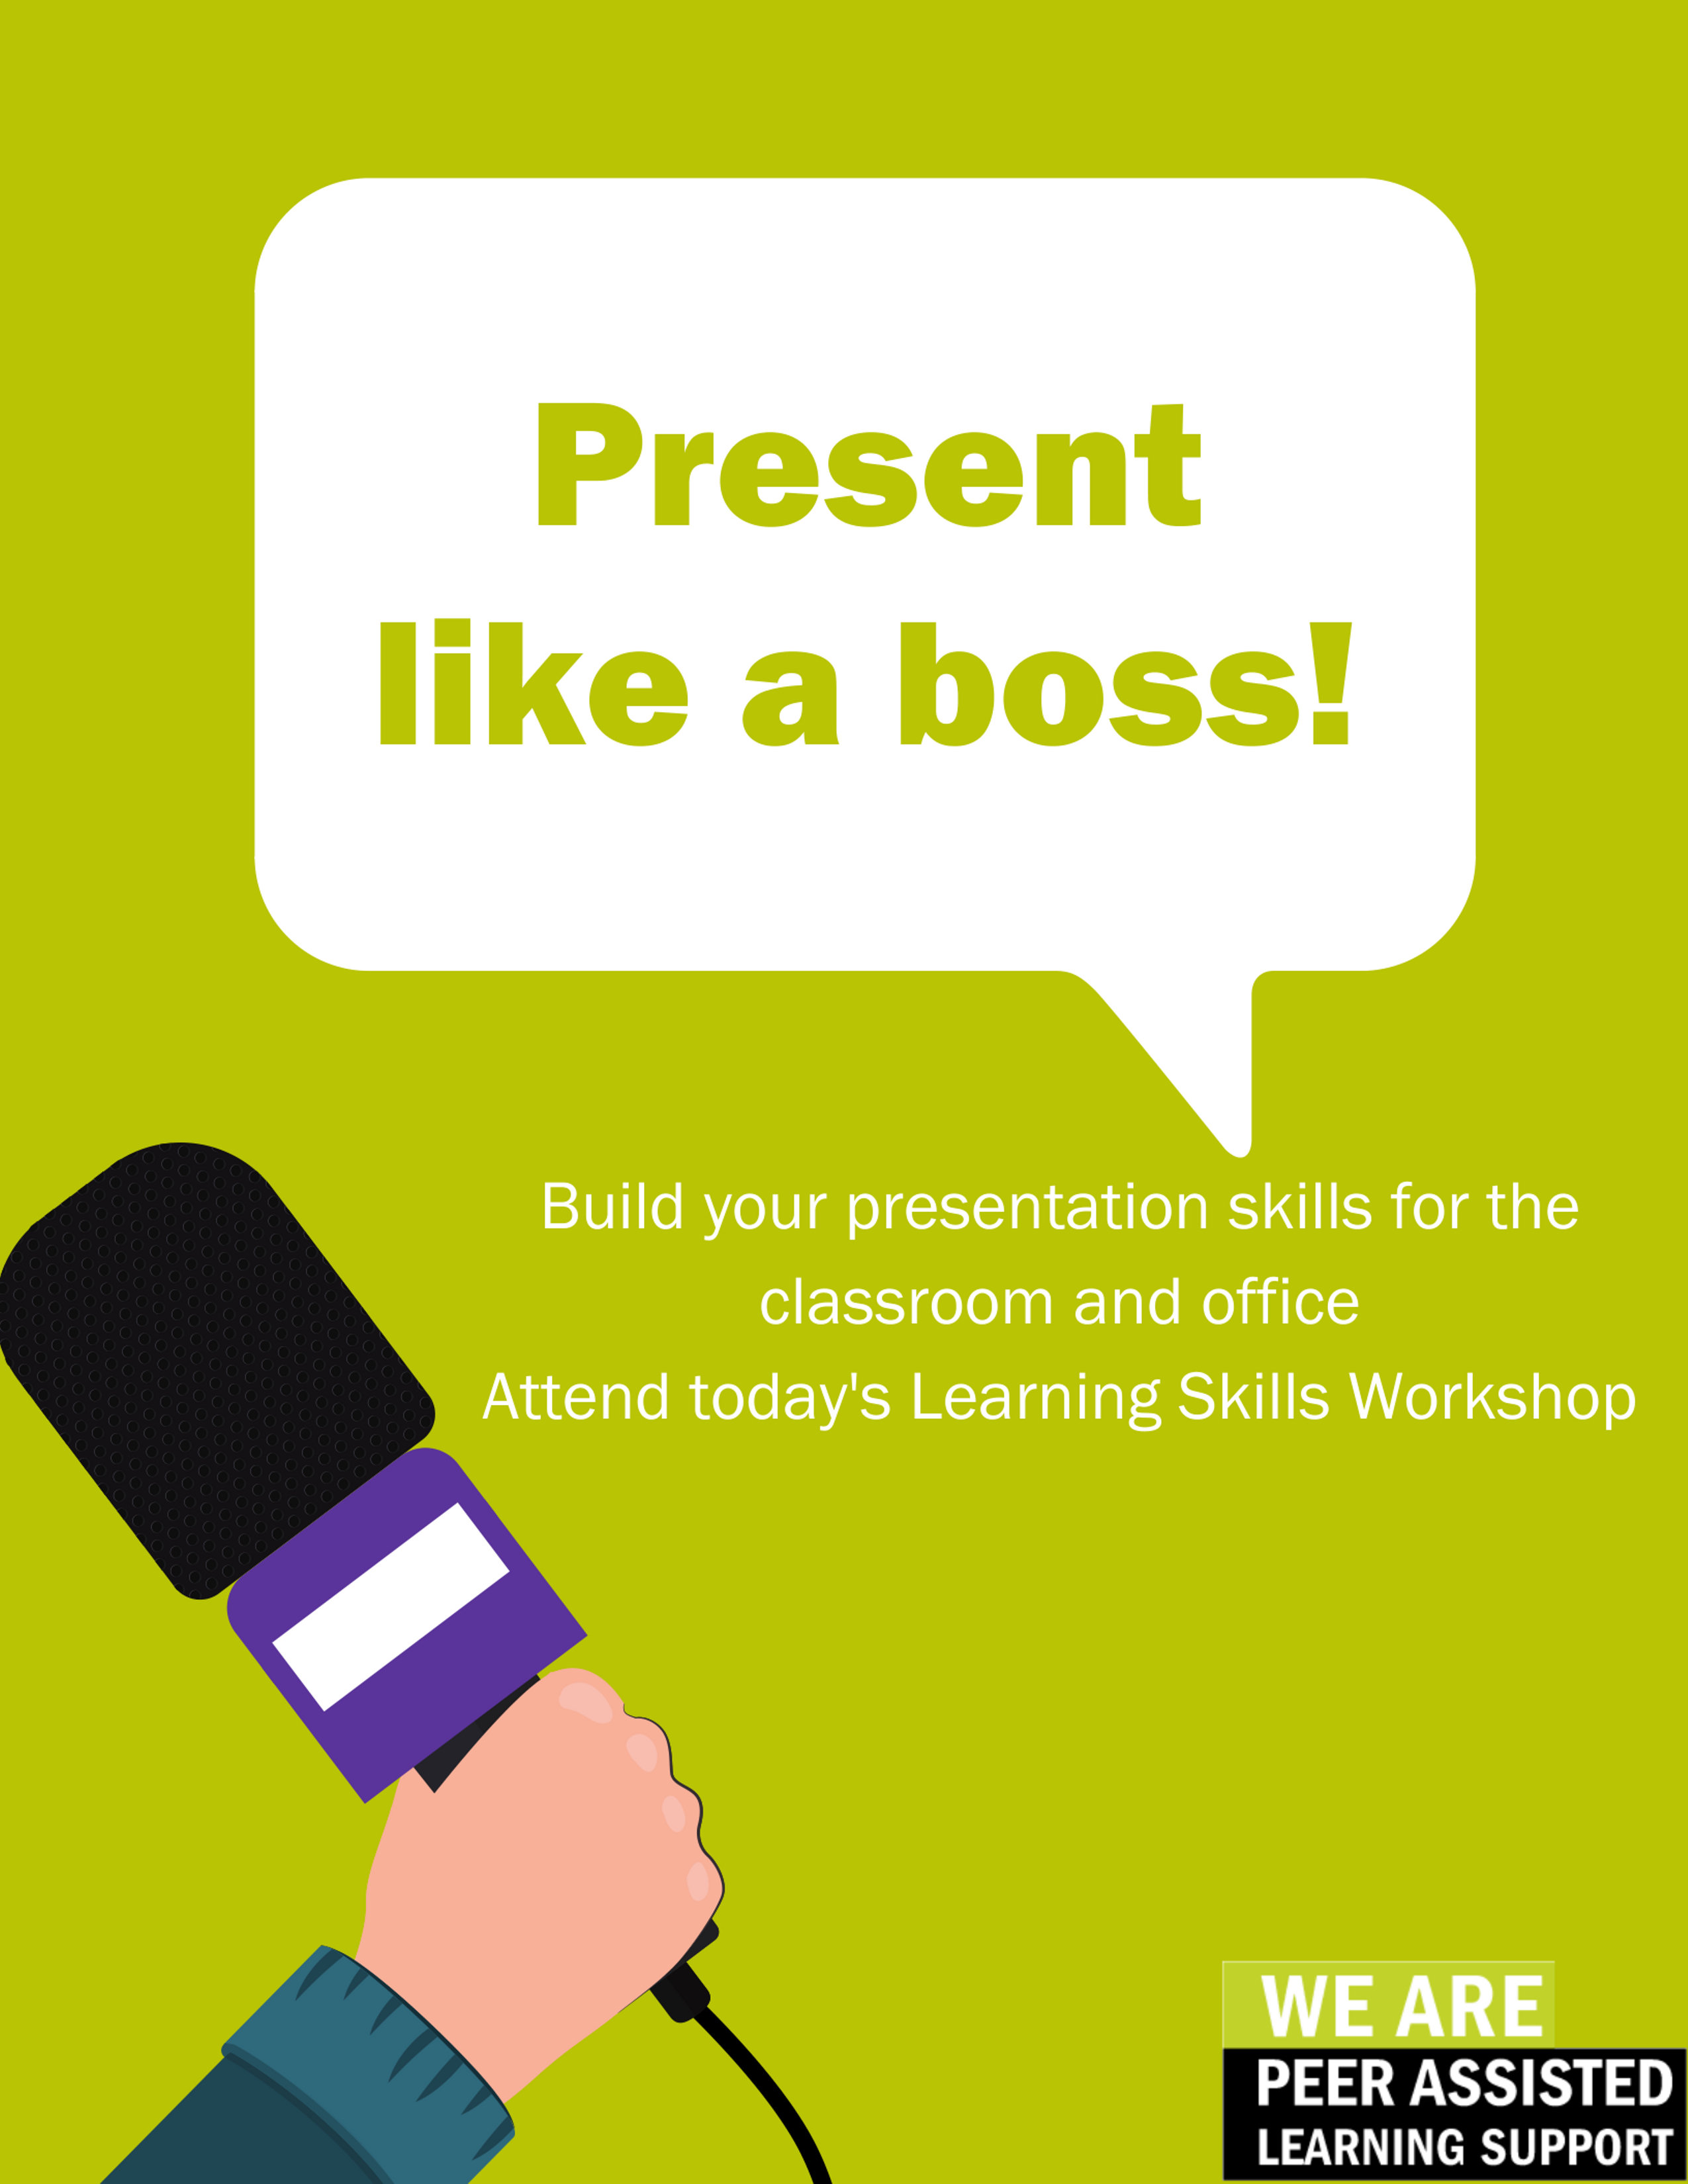 Attend this workshop and learn how to present like a boss